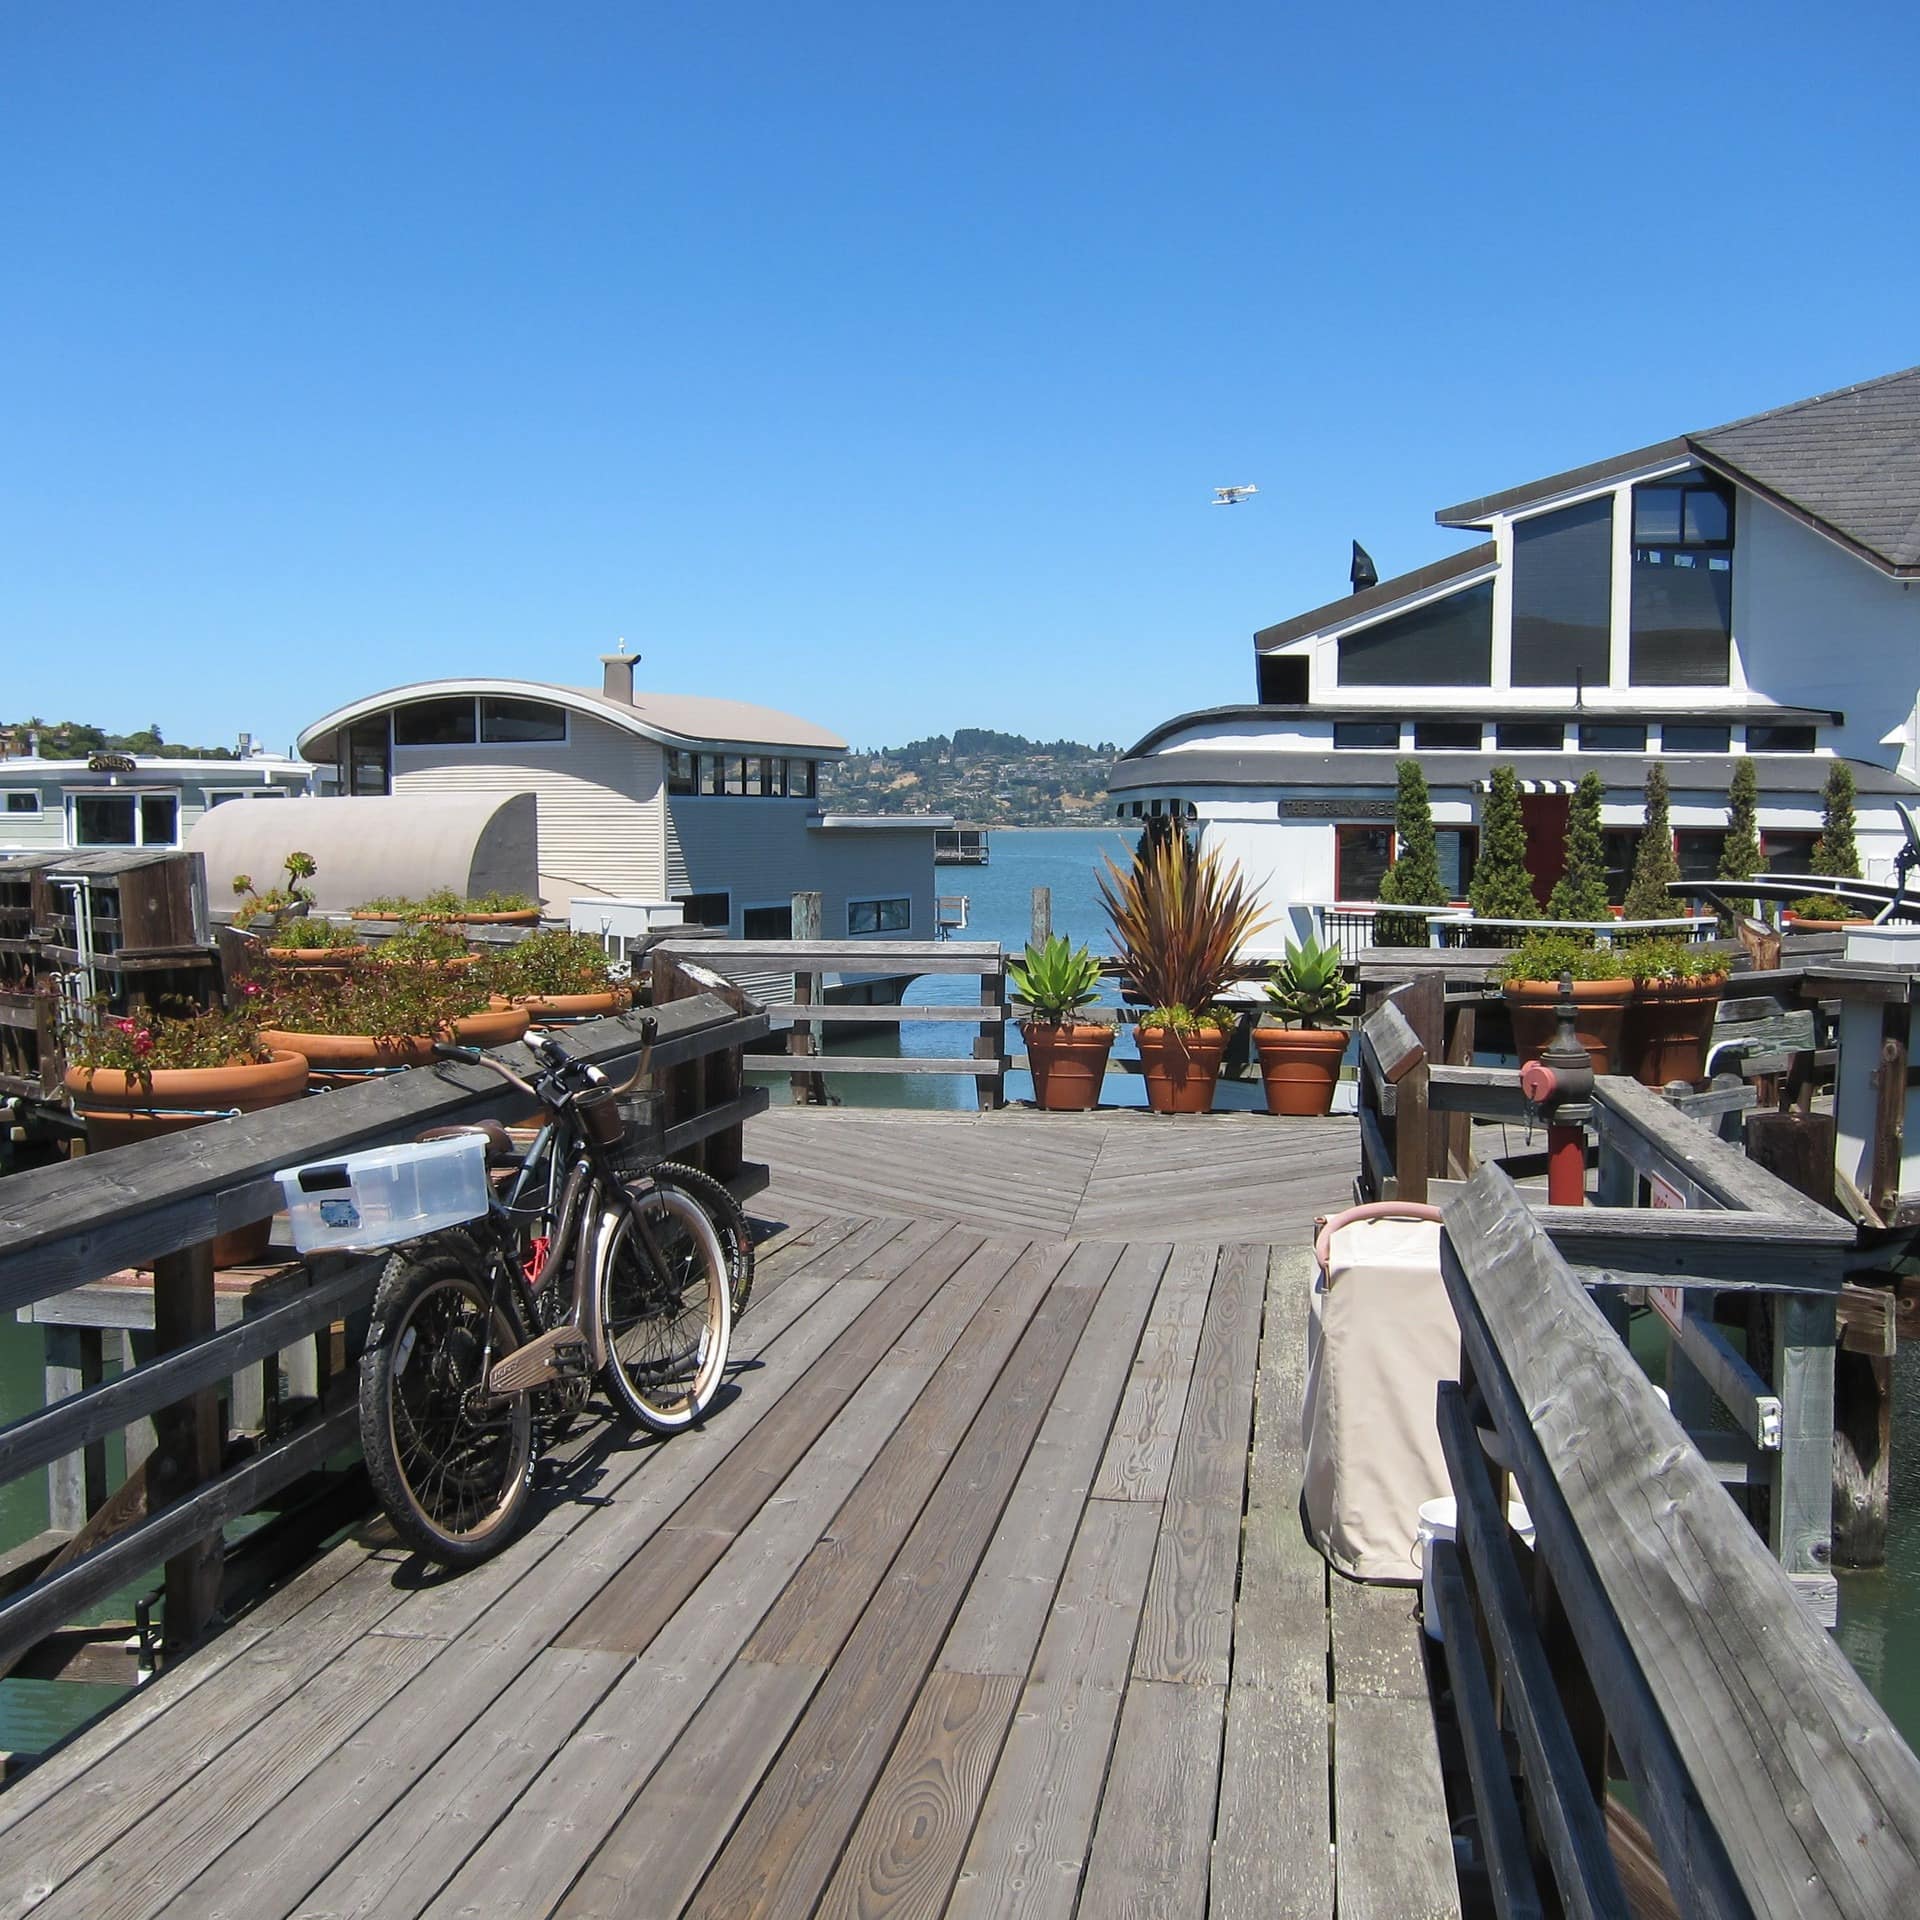 A houseboat enclave in the California city of Sausalito